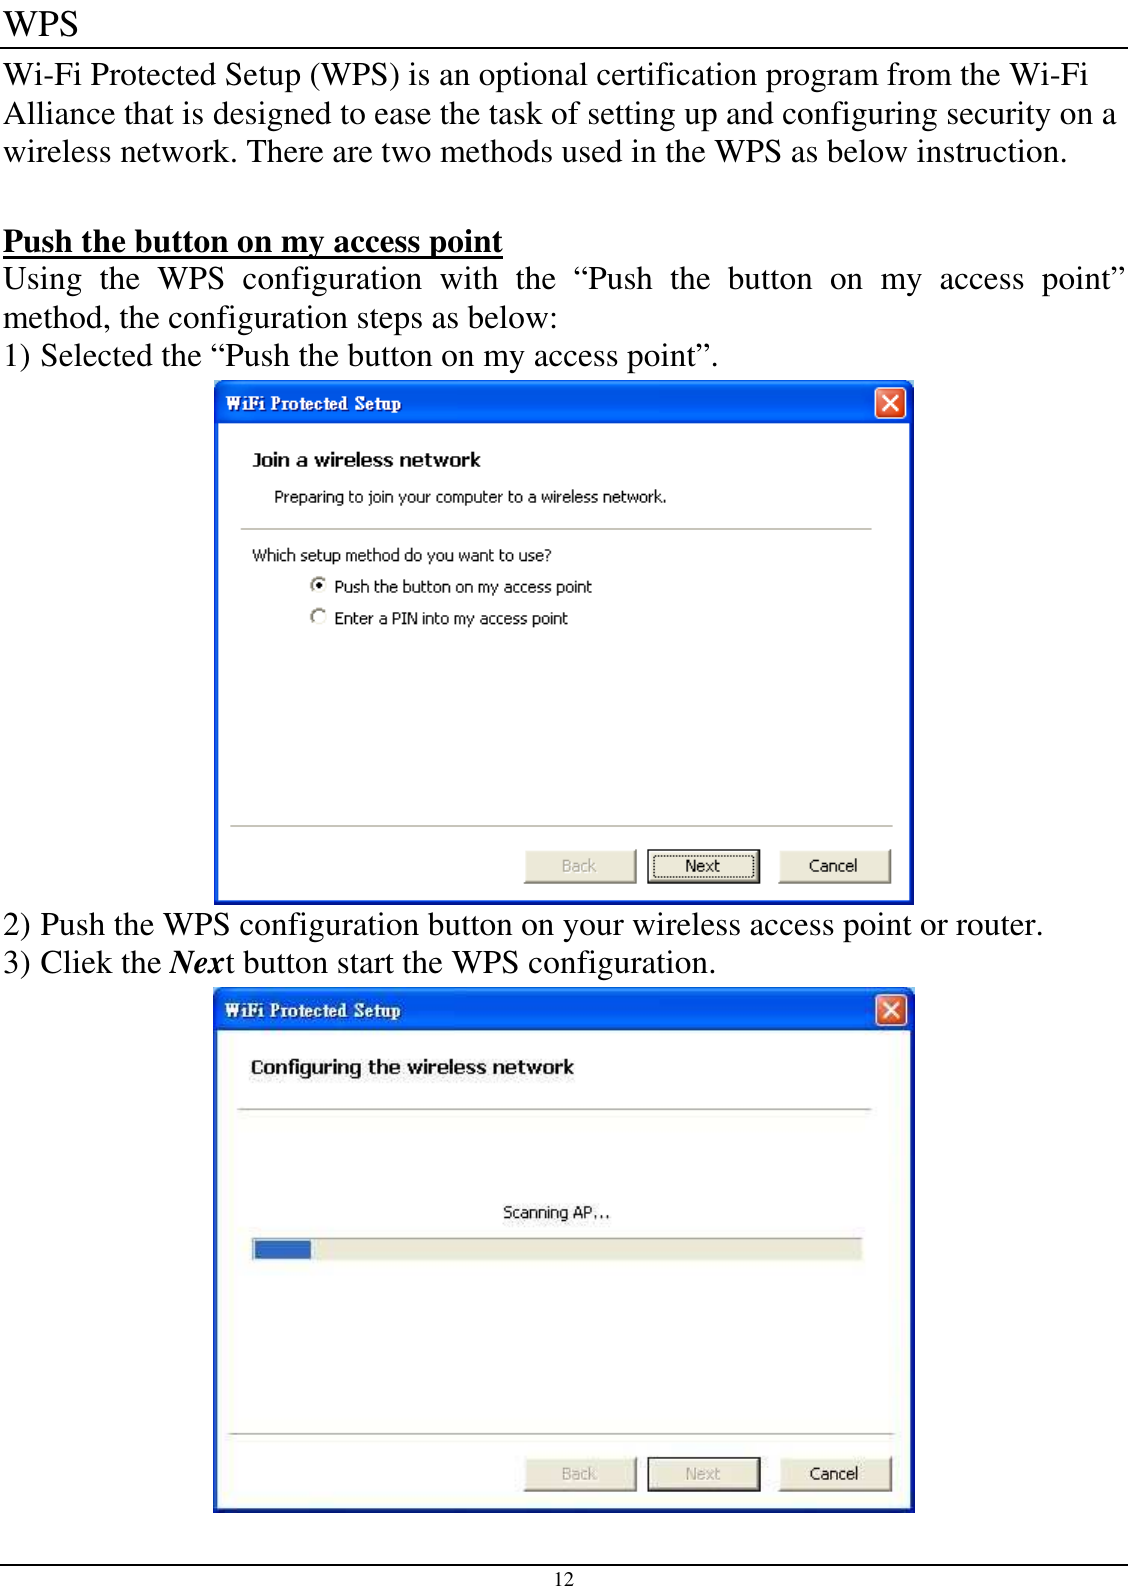  12 WPS Wi-Fi Protected Setup (WPS) is an optional certification program from the Wi-Fi Alliance that is designed to ease the task of setting up and configuring security on a wireless network. There are two methods used in the WPS as below instruction.  Push the button on my access point Using  the  WPS  configuration  with  the  “Push  the  button  on  my  access  point” method, the configuration steps as below: 1) Selected the “Push the button on my access point”.  2) Push the WPS configuration button on your wireless access point or router. 3) Cliek the Next button start the WPS configuration.  